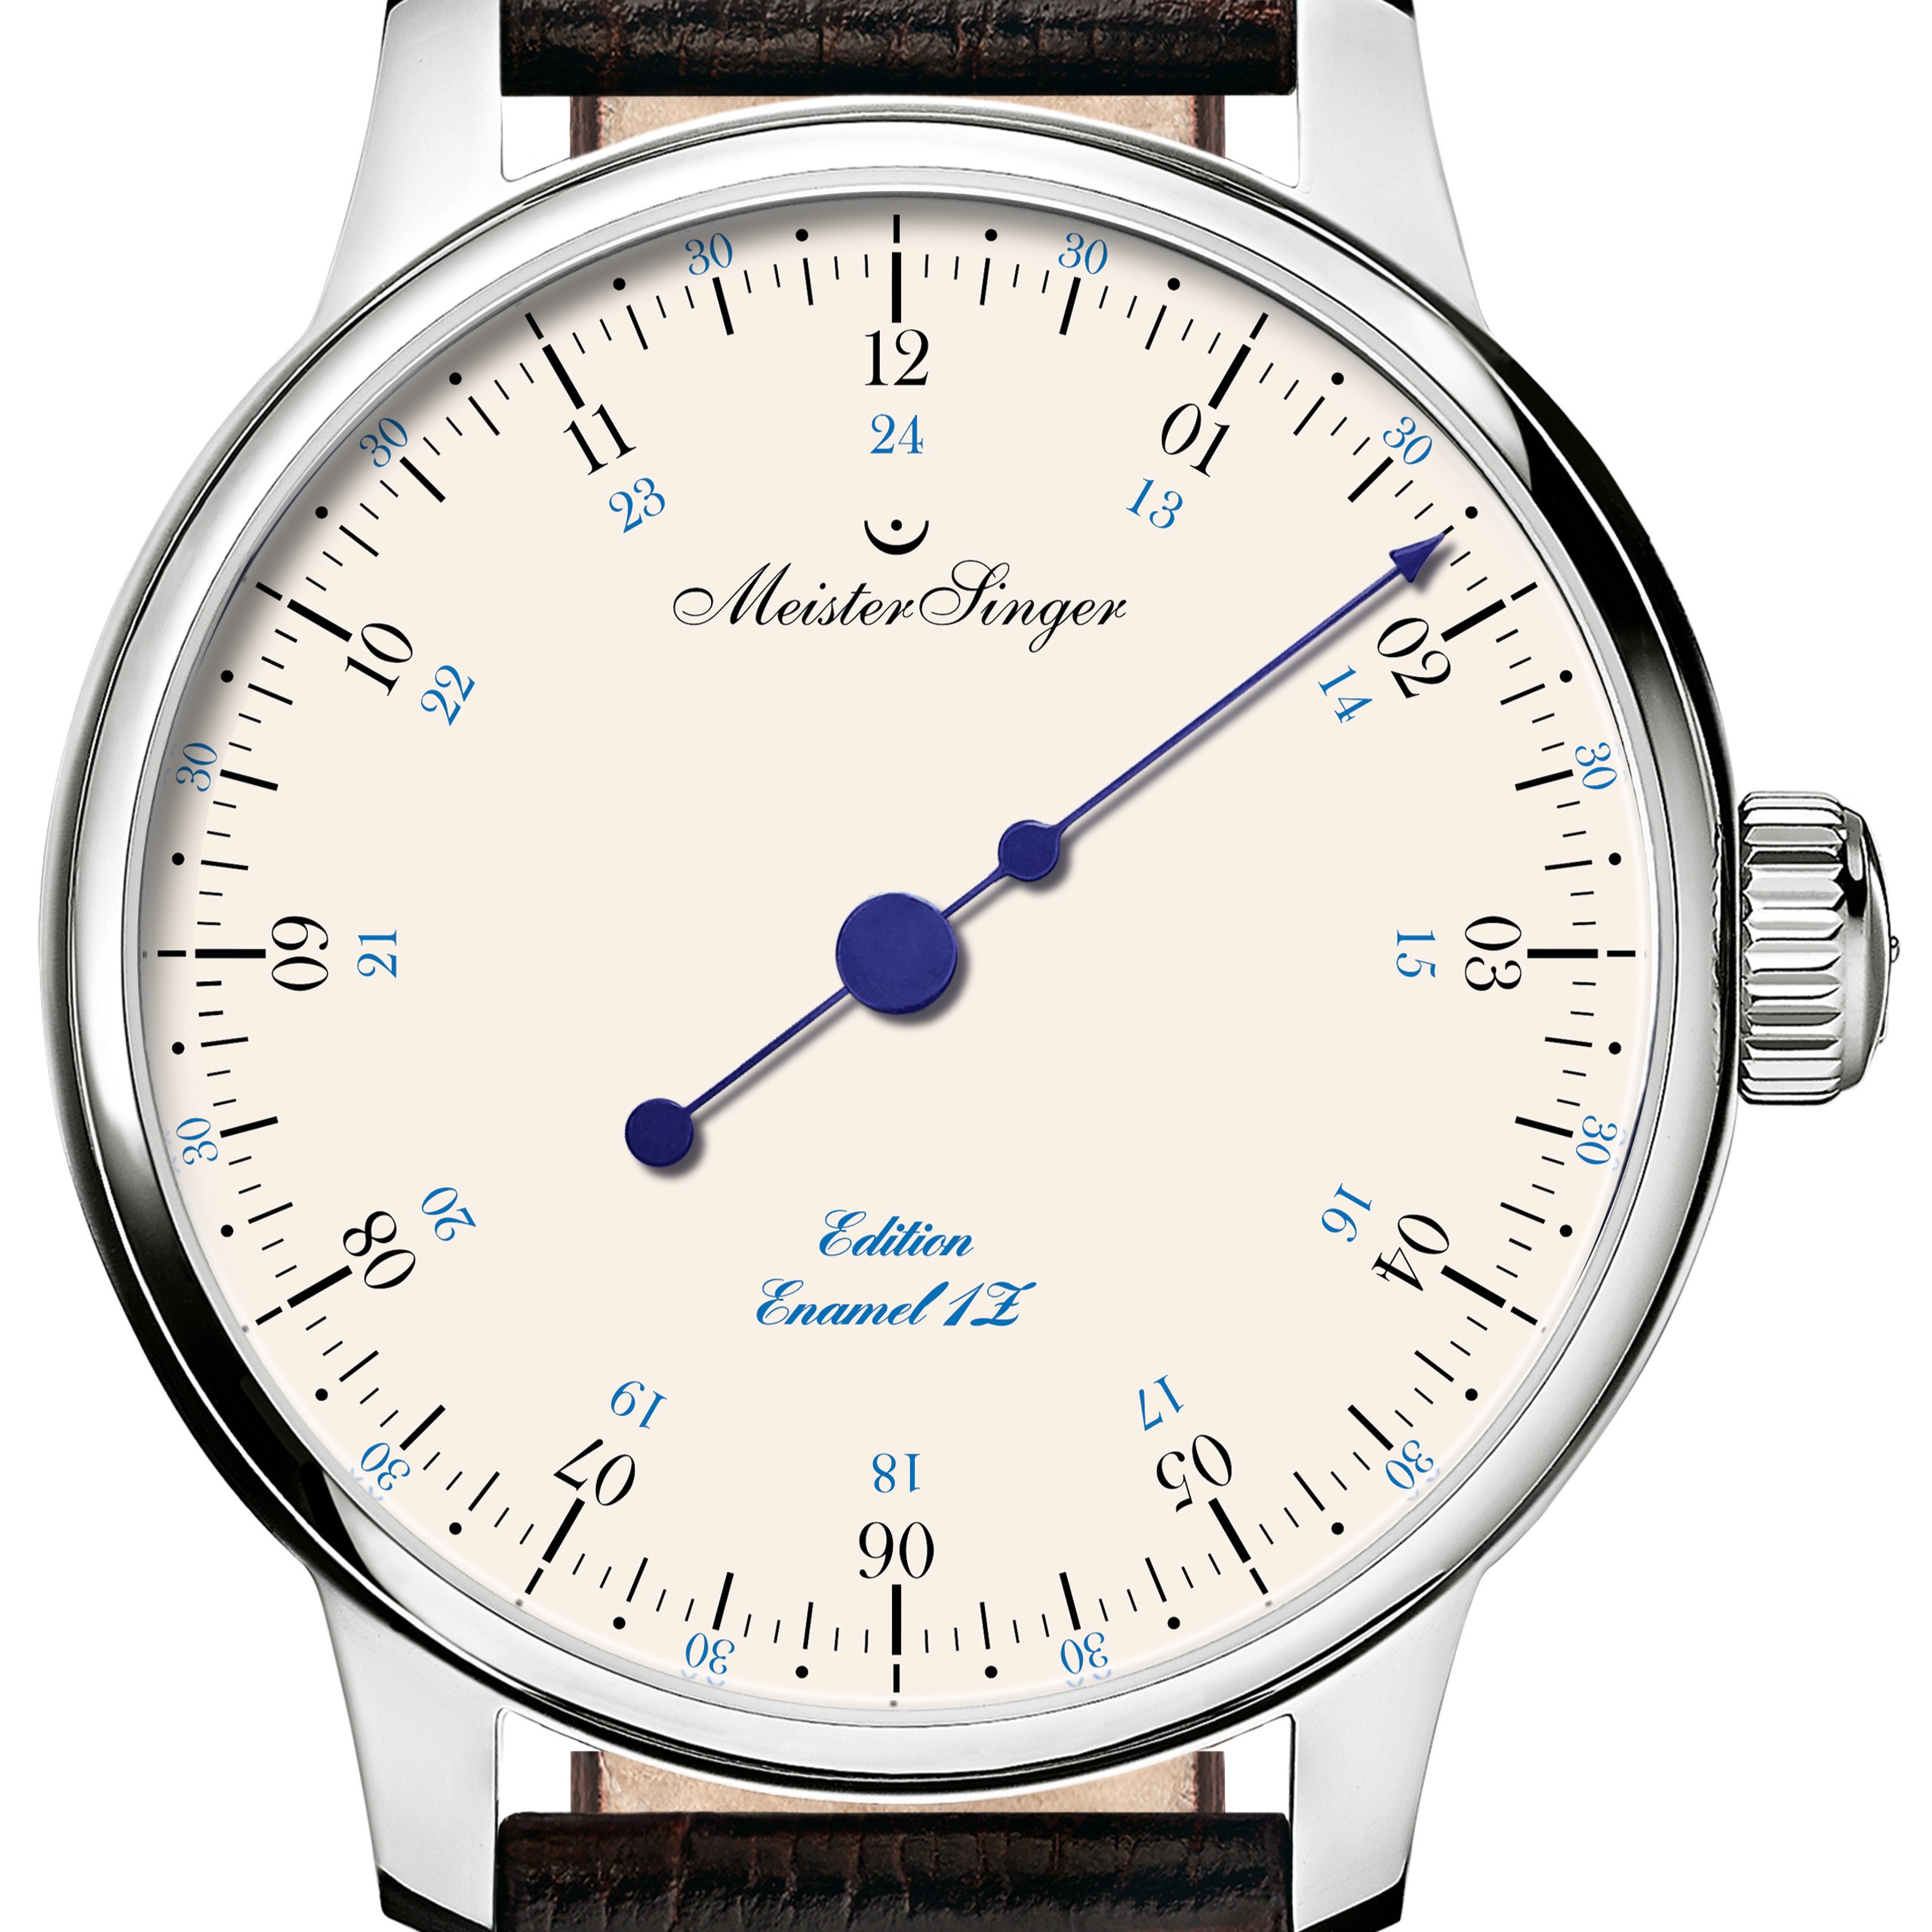 Old School Beauty: MeisterSinger Introduces Limited Edition Enamel 